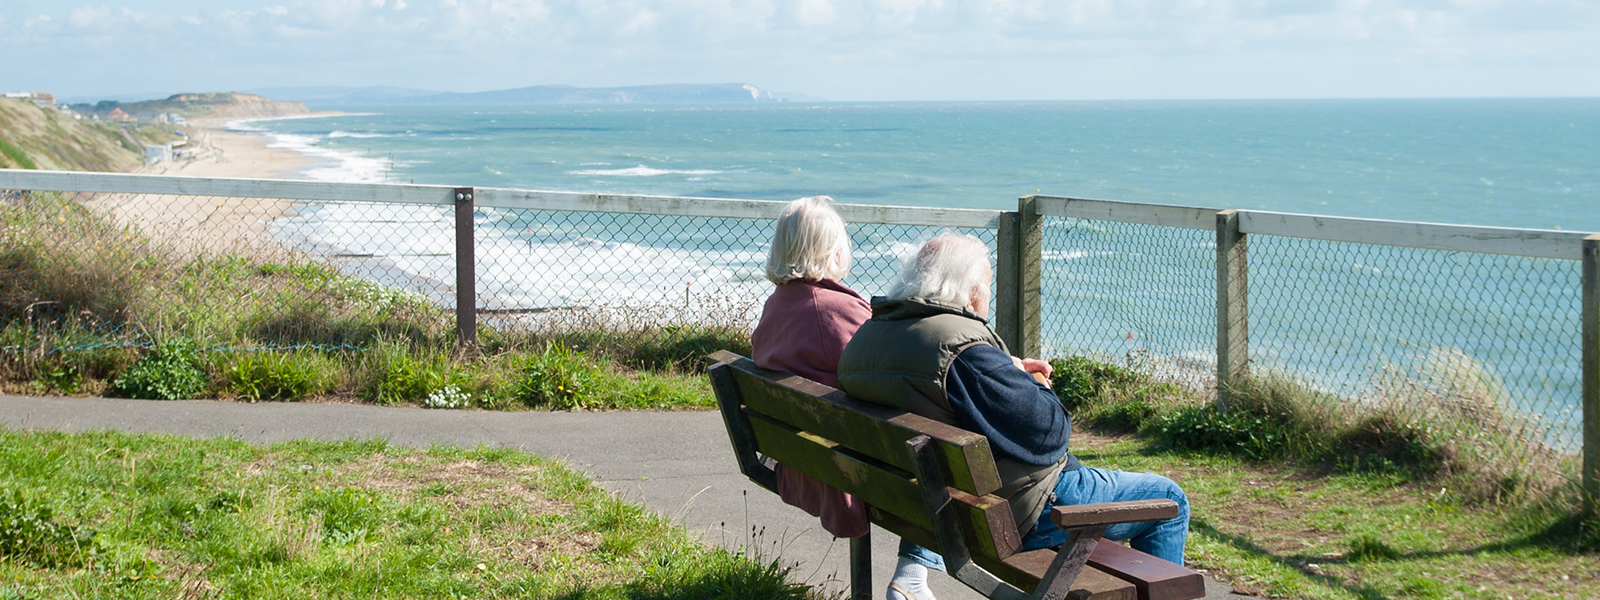 Couple on a bench overlooking the sea